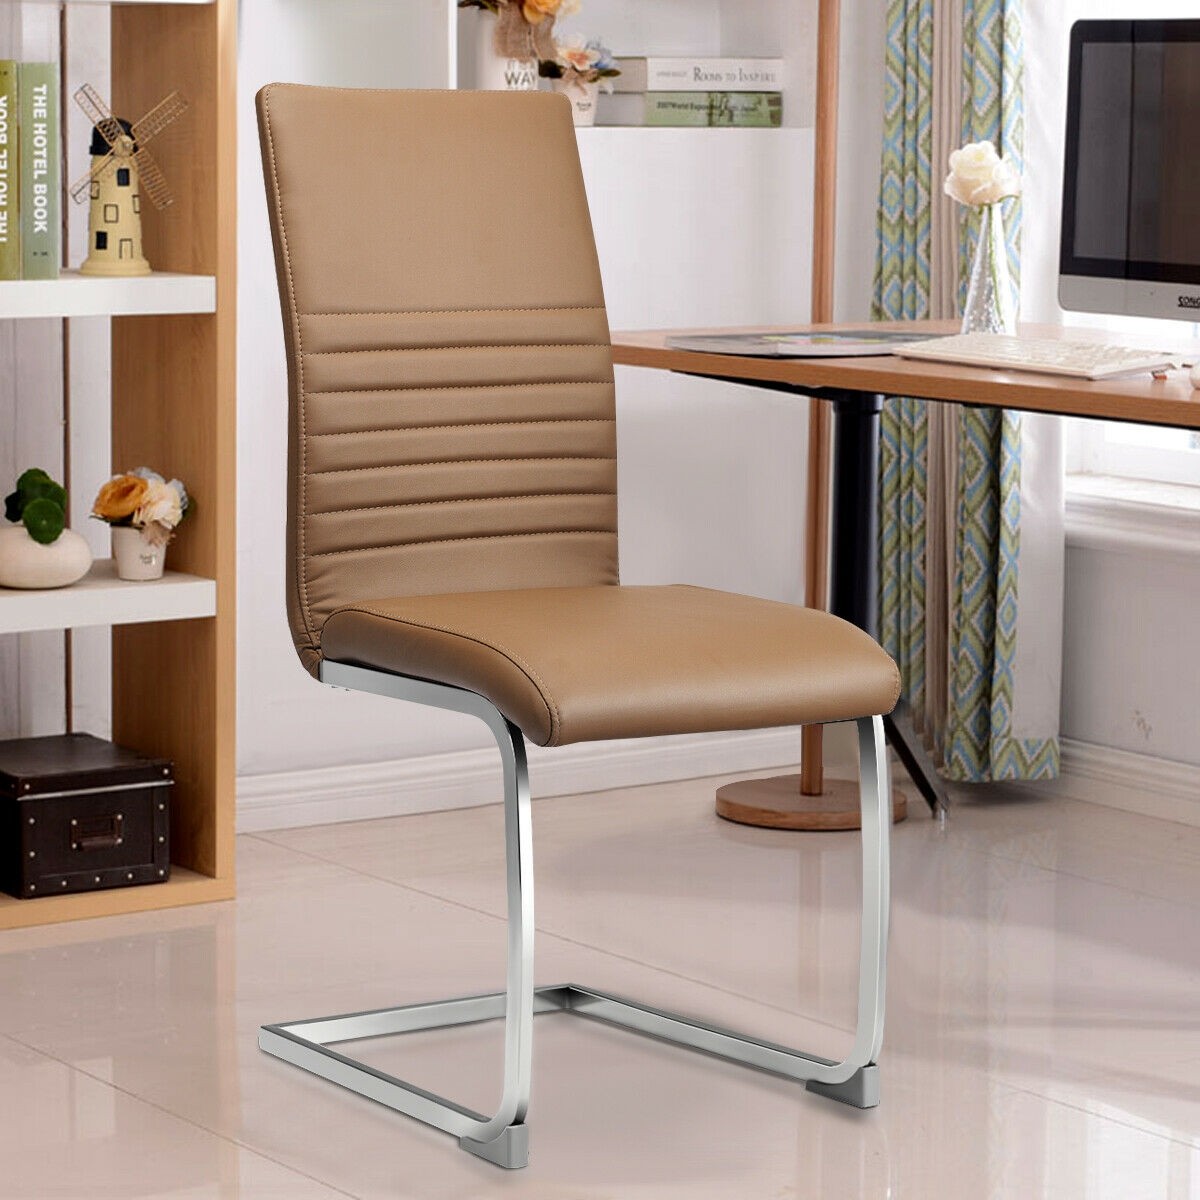 4 Pcs Kitchen Dining PU Leather Chair